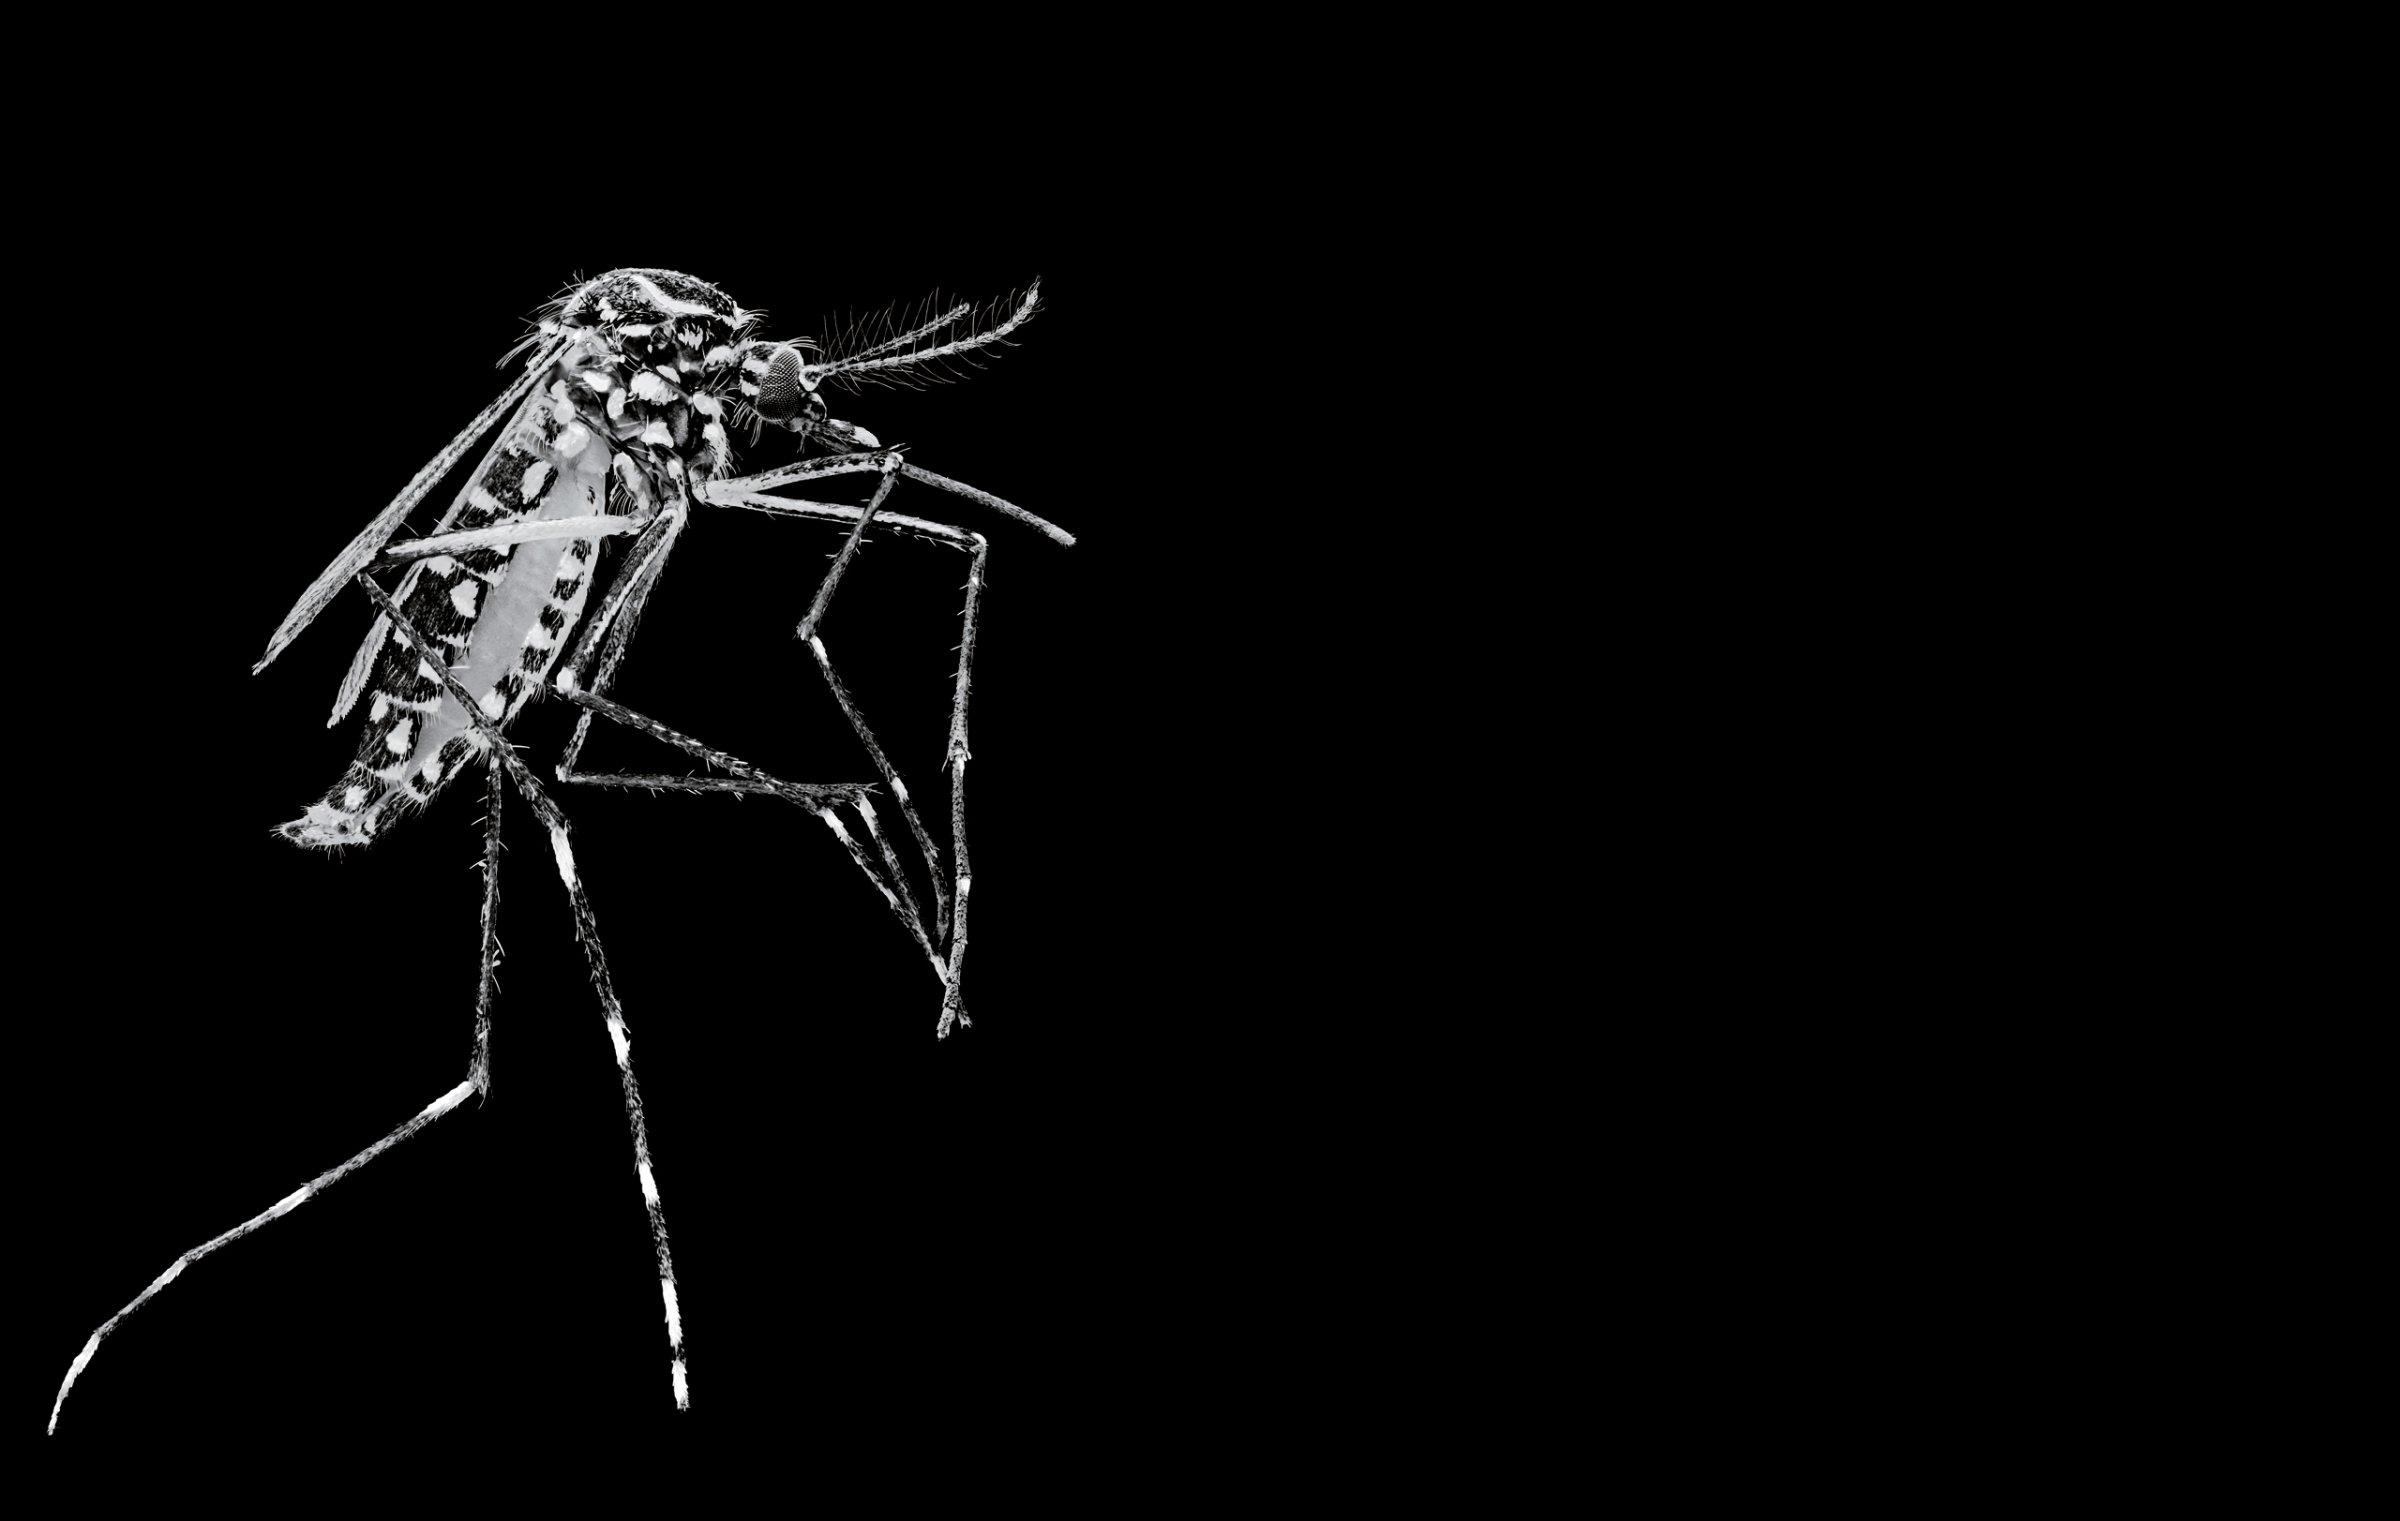 This magnified photograph shows an Aedes aegypti mosquito—the species capable of transmitting Zika